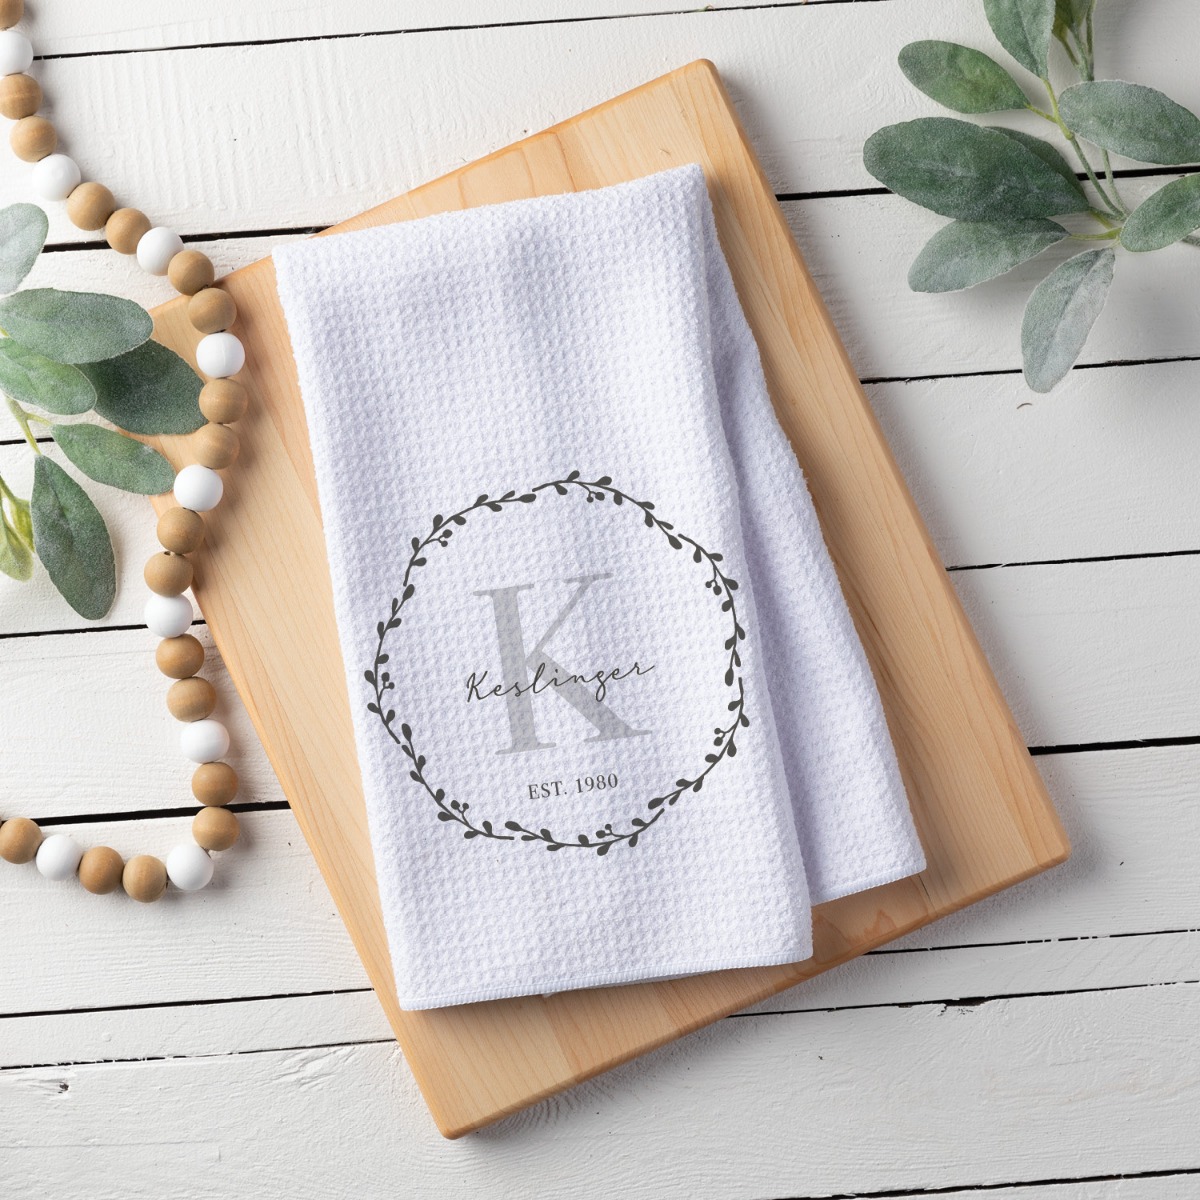 Wreath waffle tea towel with initial and name